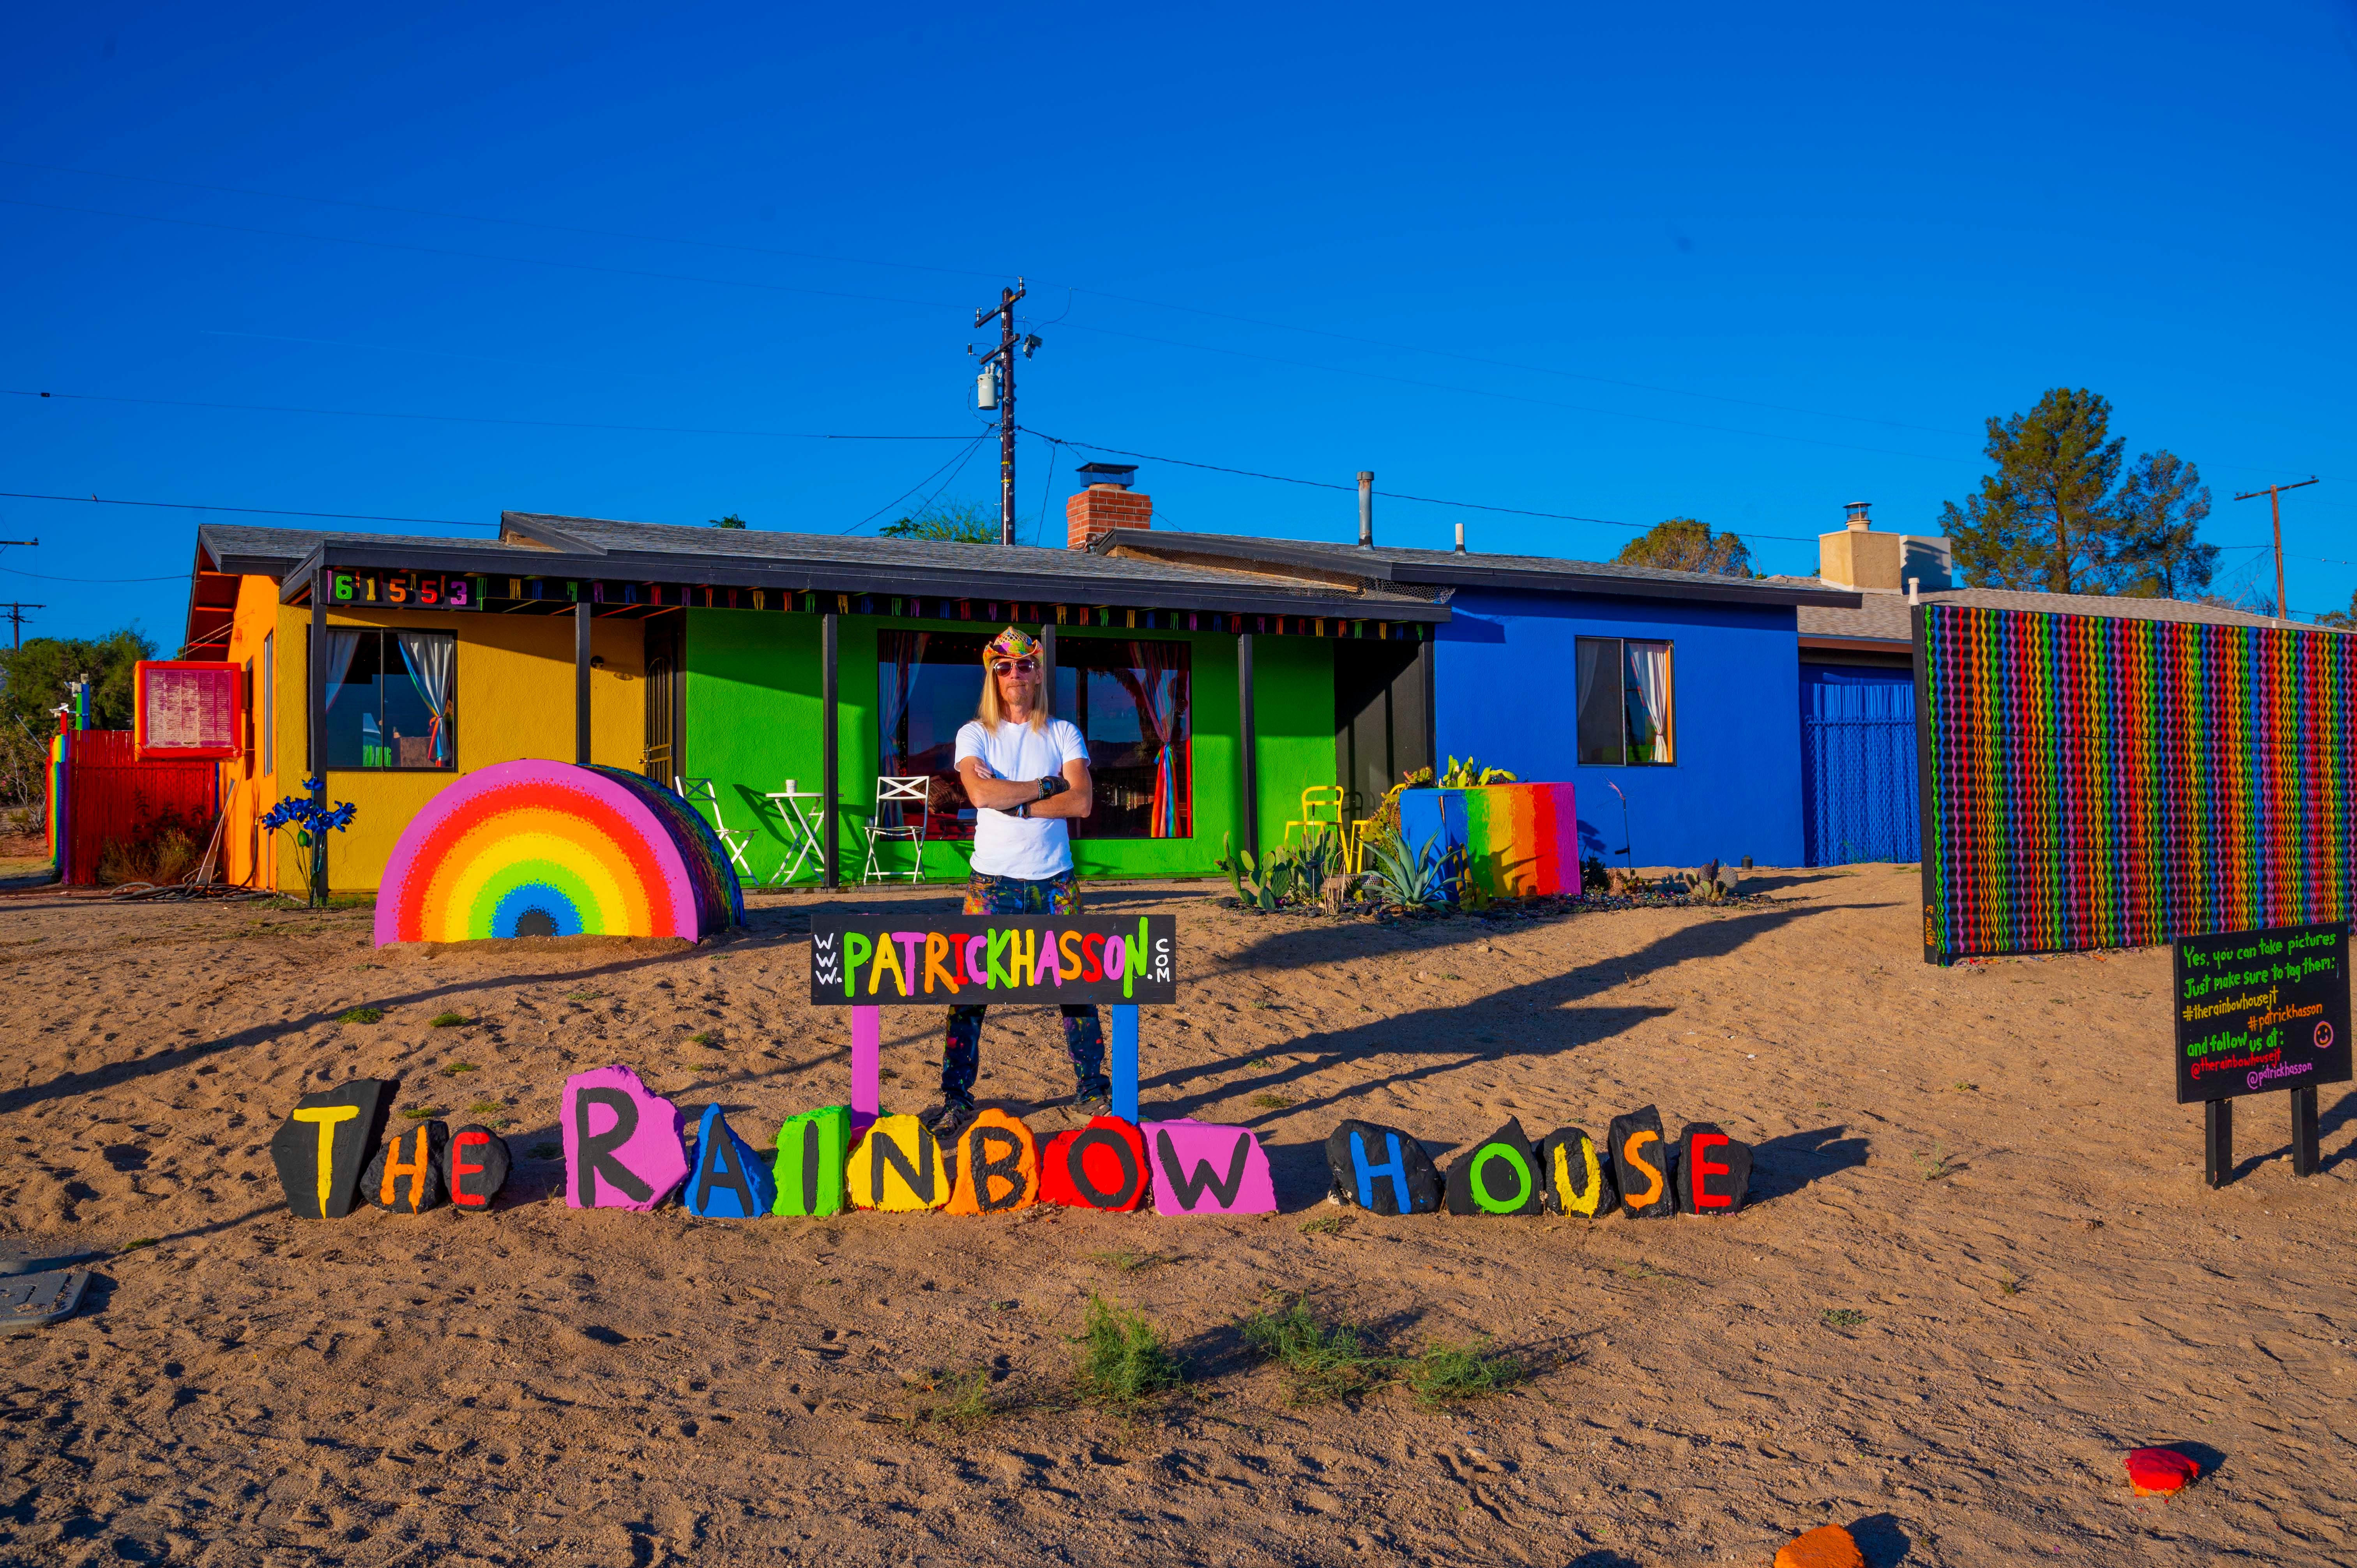 Joshua Tree properties the Rainbow House and Bonita Domes to appear on 'Zillow Gone Wild'